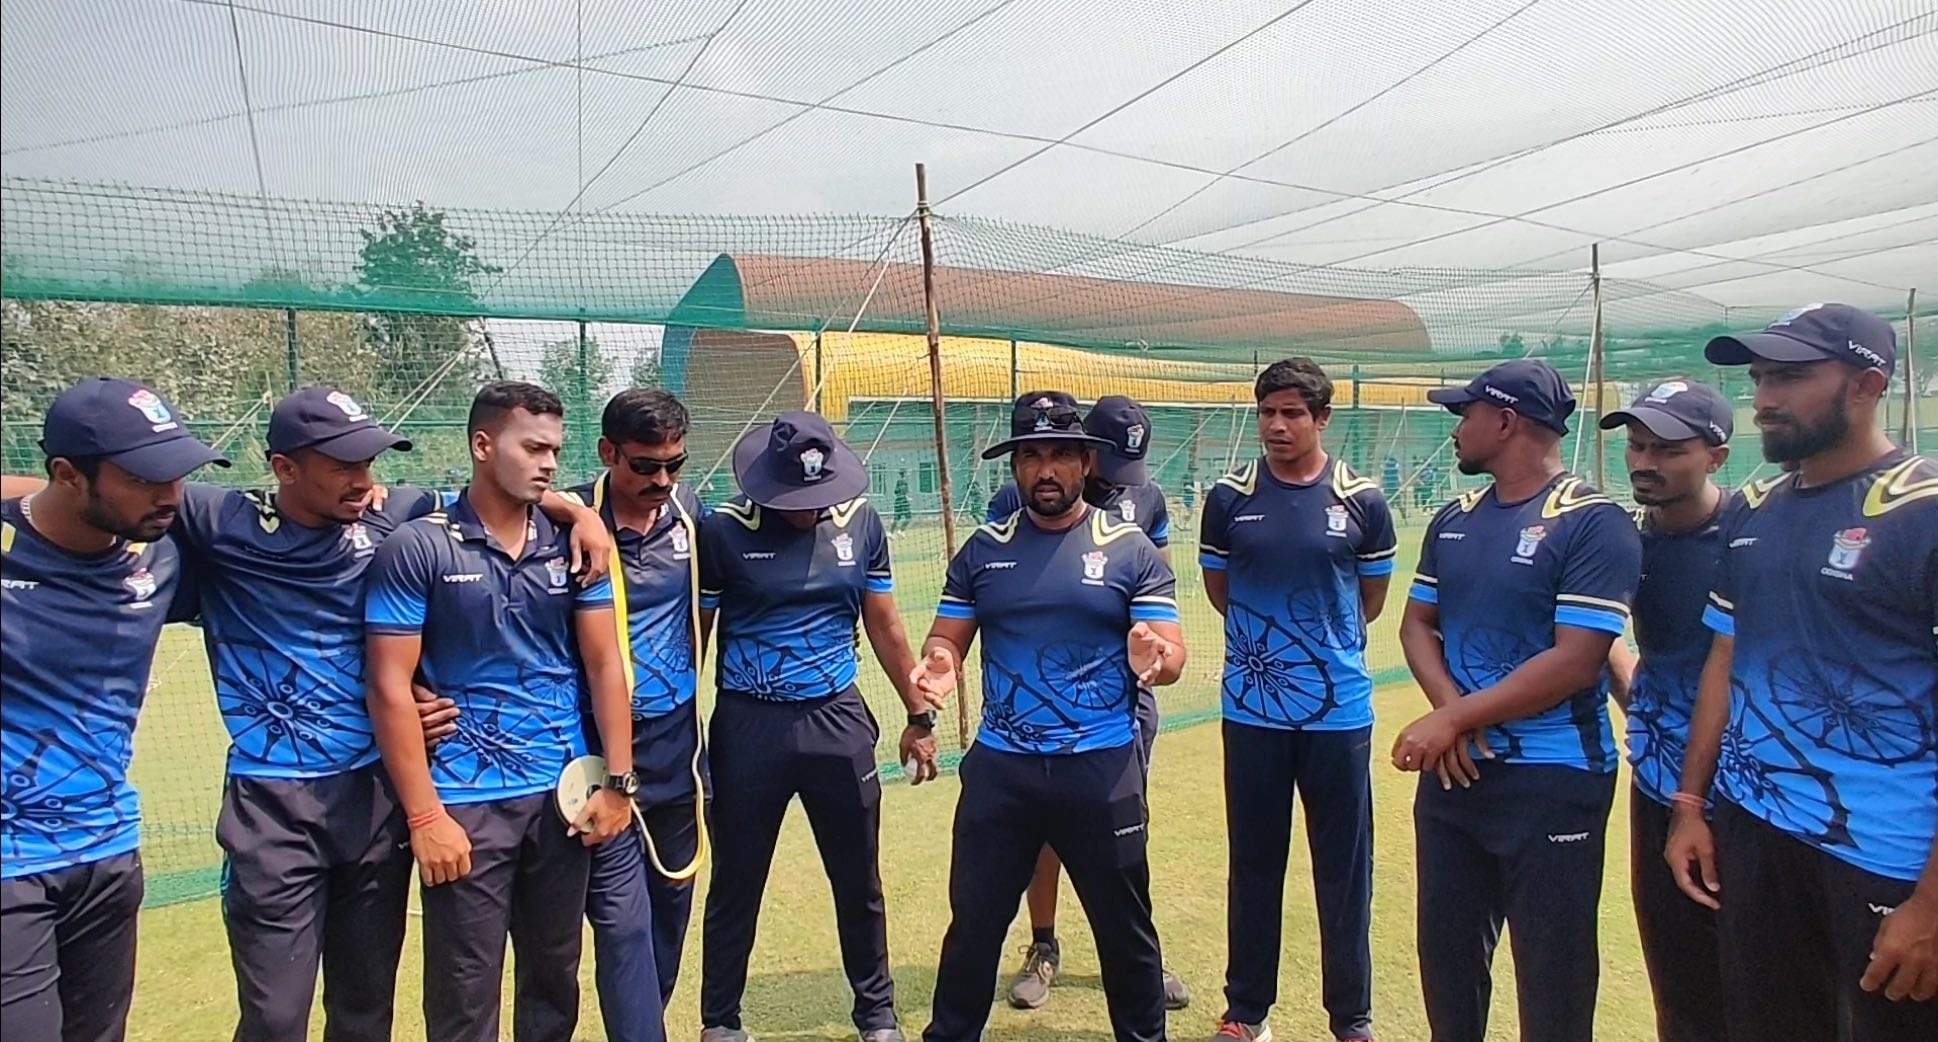 Vijay Hazare LIVE Streaming When and how to watch Vijay Hazare Trophy 2022 Live Streaming in India